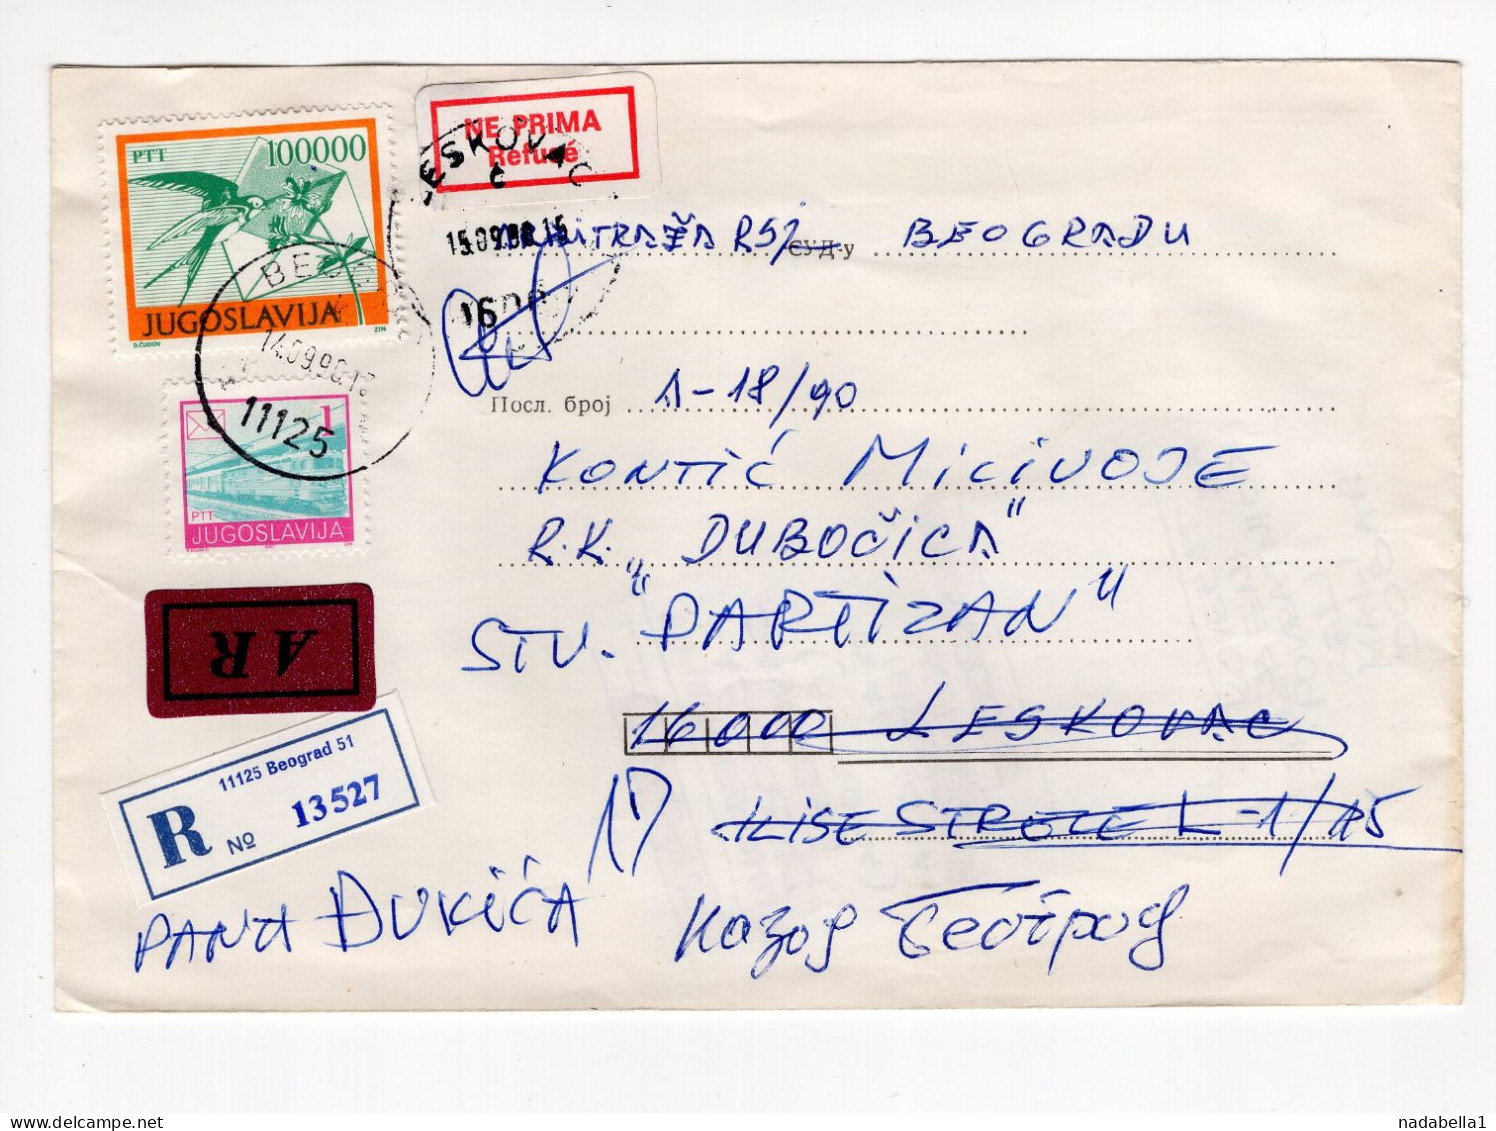 1990. YUGOSLAVIA,SERBIA,BELGRADE TO LESKOVAC AND BACK,AR,RECORDED COVER,INFLATION,INFLATIONARY MAIL,LABEL:REFUSED - Storia Postale